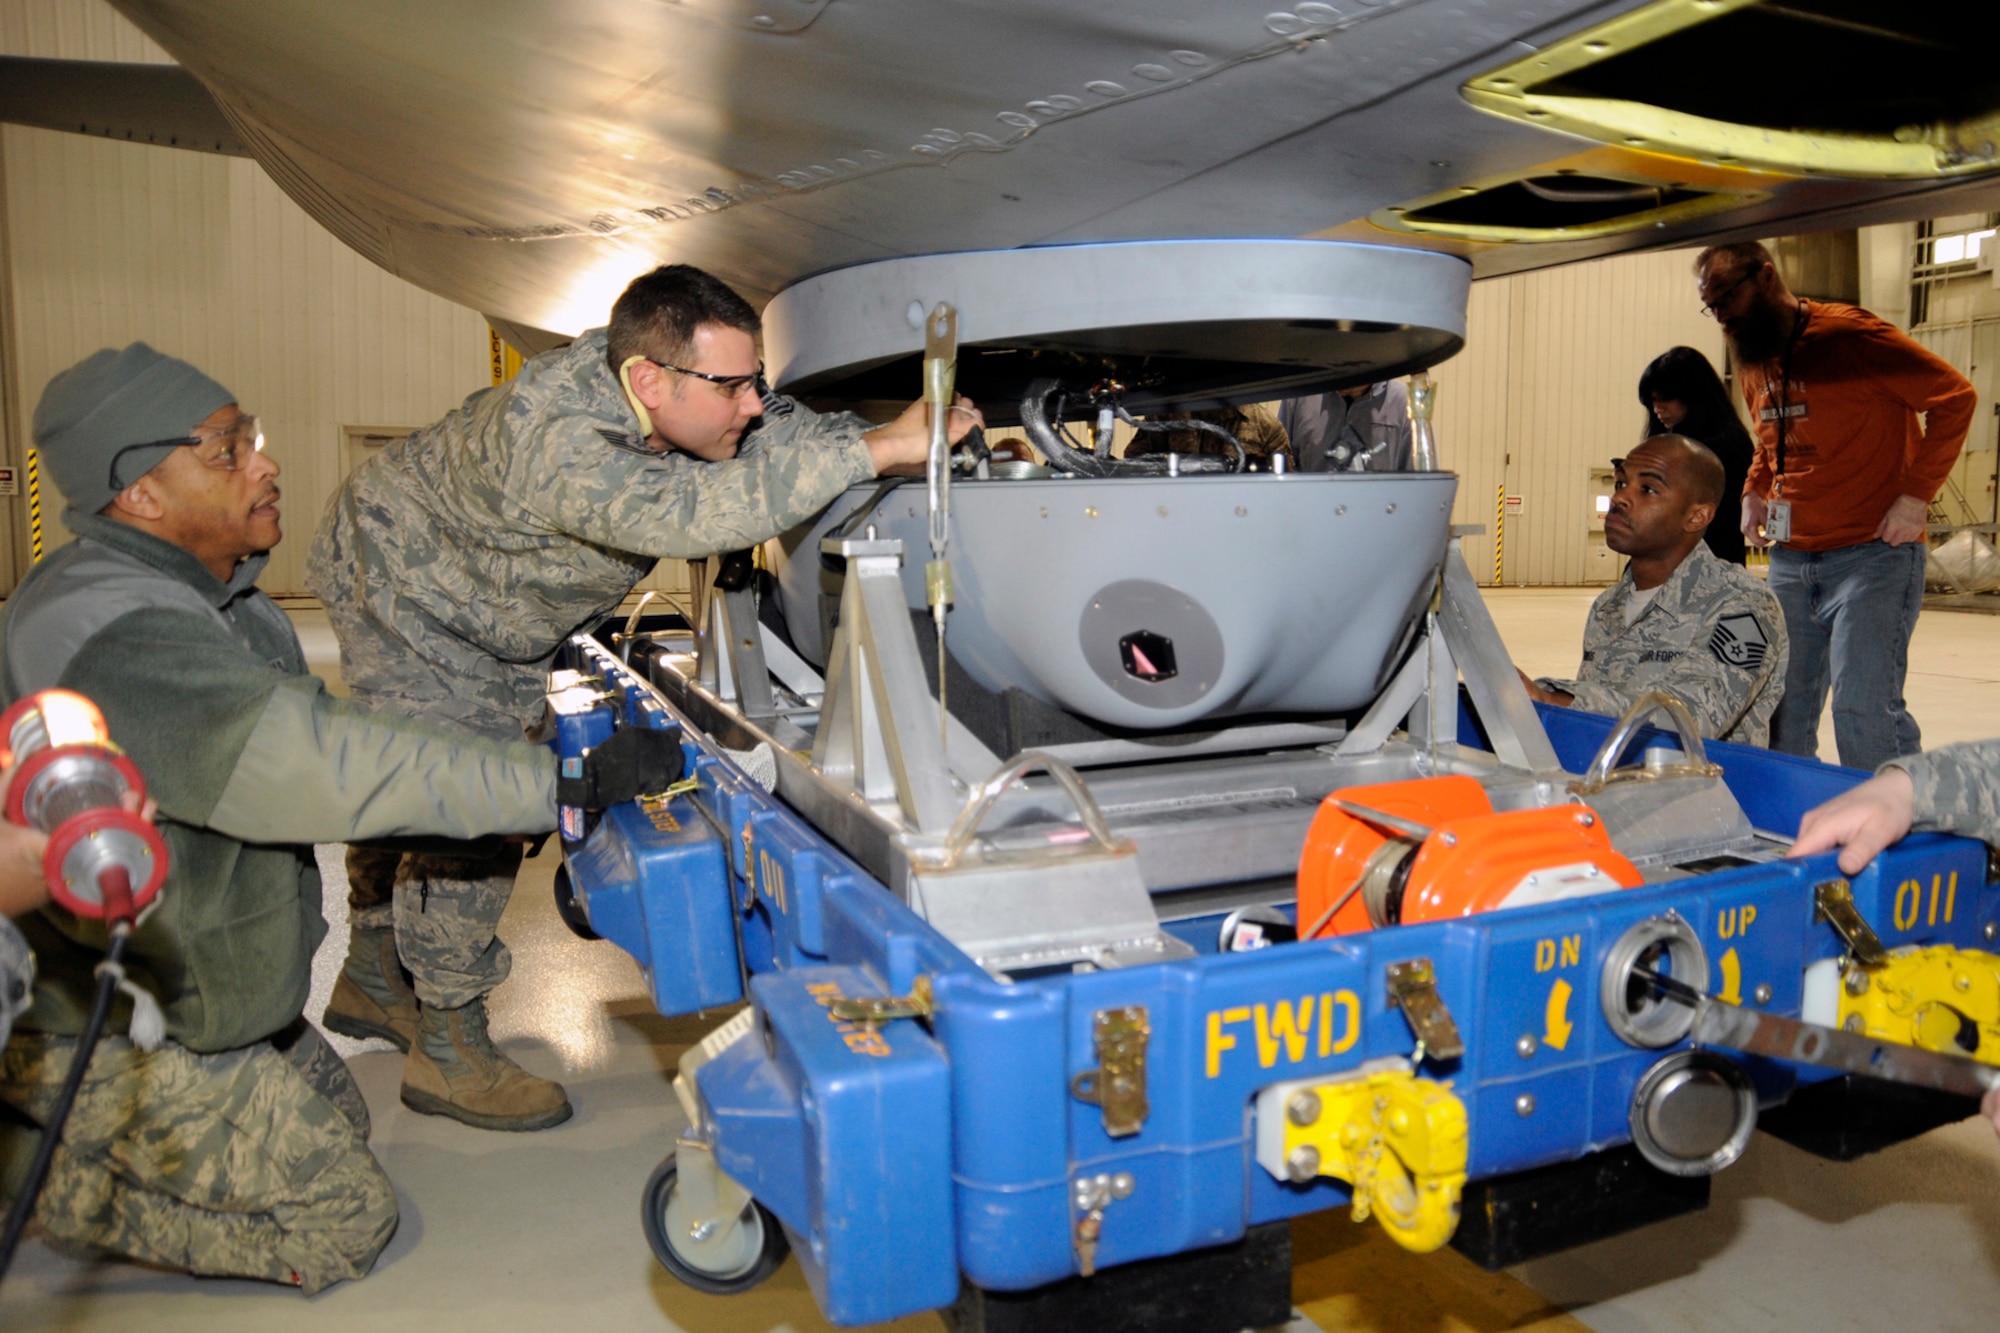 130312-Z-HC784-075 - Technical Sgt. John Kerschenheiter connects the final ground wires to marry a prototype LAIRCM -- large aircraft infrared countermeasure -- pod to a KC-135 Stratotanker prior to the final seating of the pod at Selfridge Air National Guard Base, Mich., March 12, 2013. Assisting Kerschenheiter are Technical Sgt. Louis Jones (left) and Master Sgt. David Bowers (right). All three Airmen are members of the 191st Maintenance Squadron at Selfridge. (Air National Guard photo by John S. Swanson)